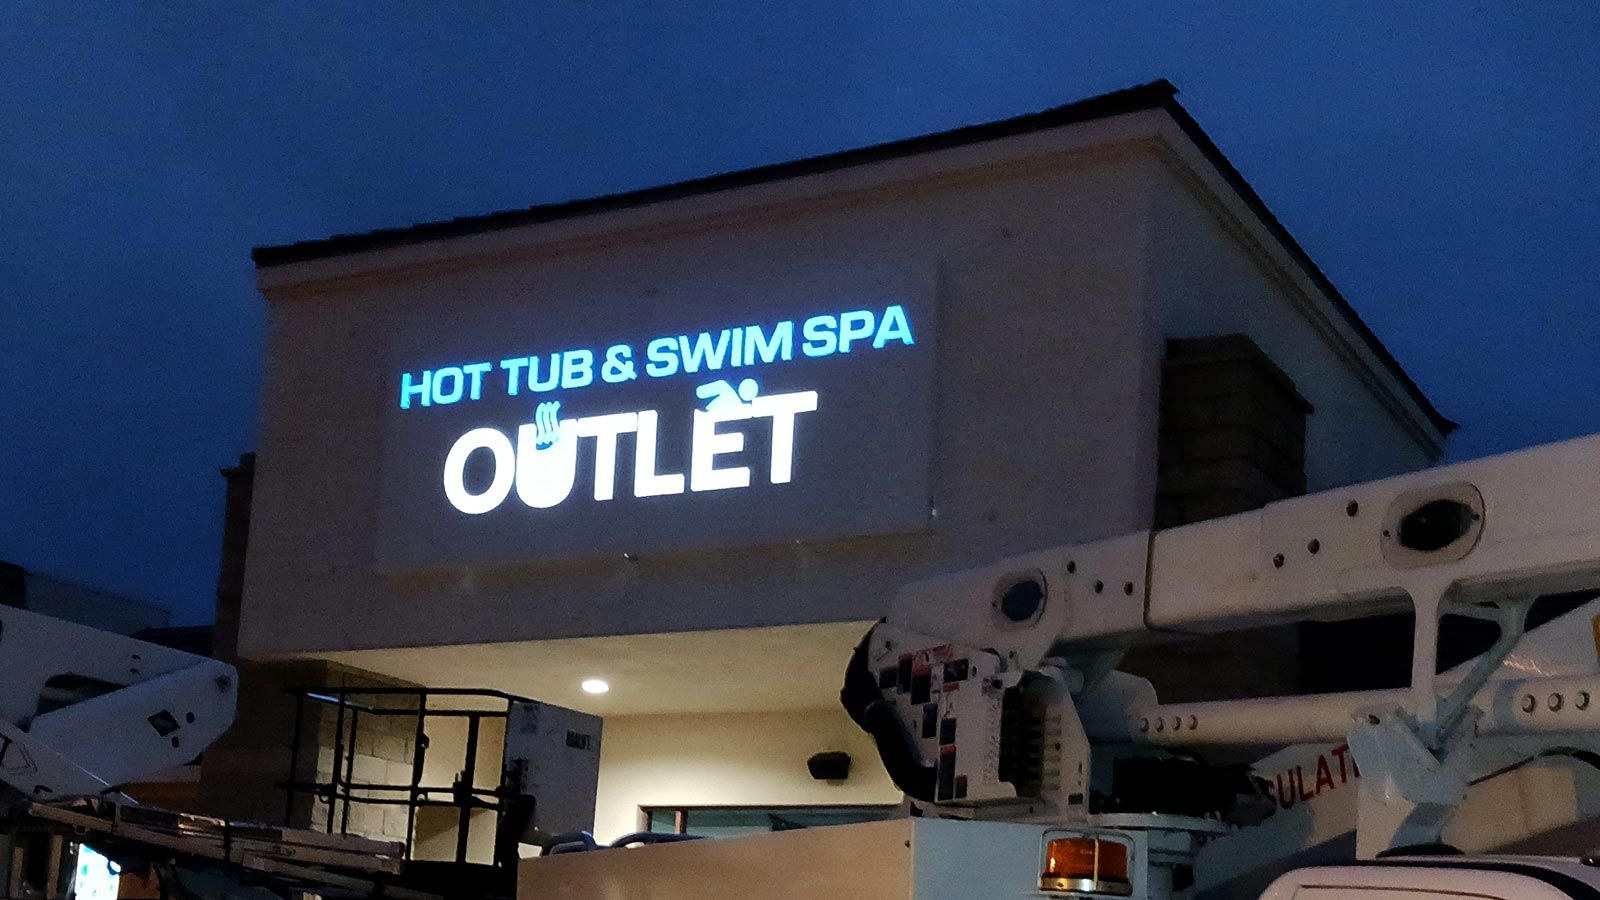 Hot Tub and Swim Spa Outlet light box sign for exterior use